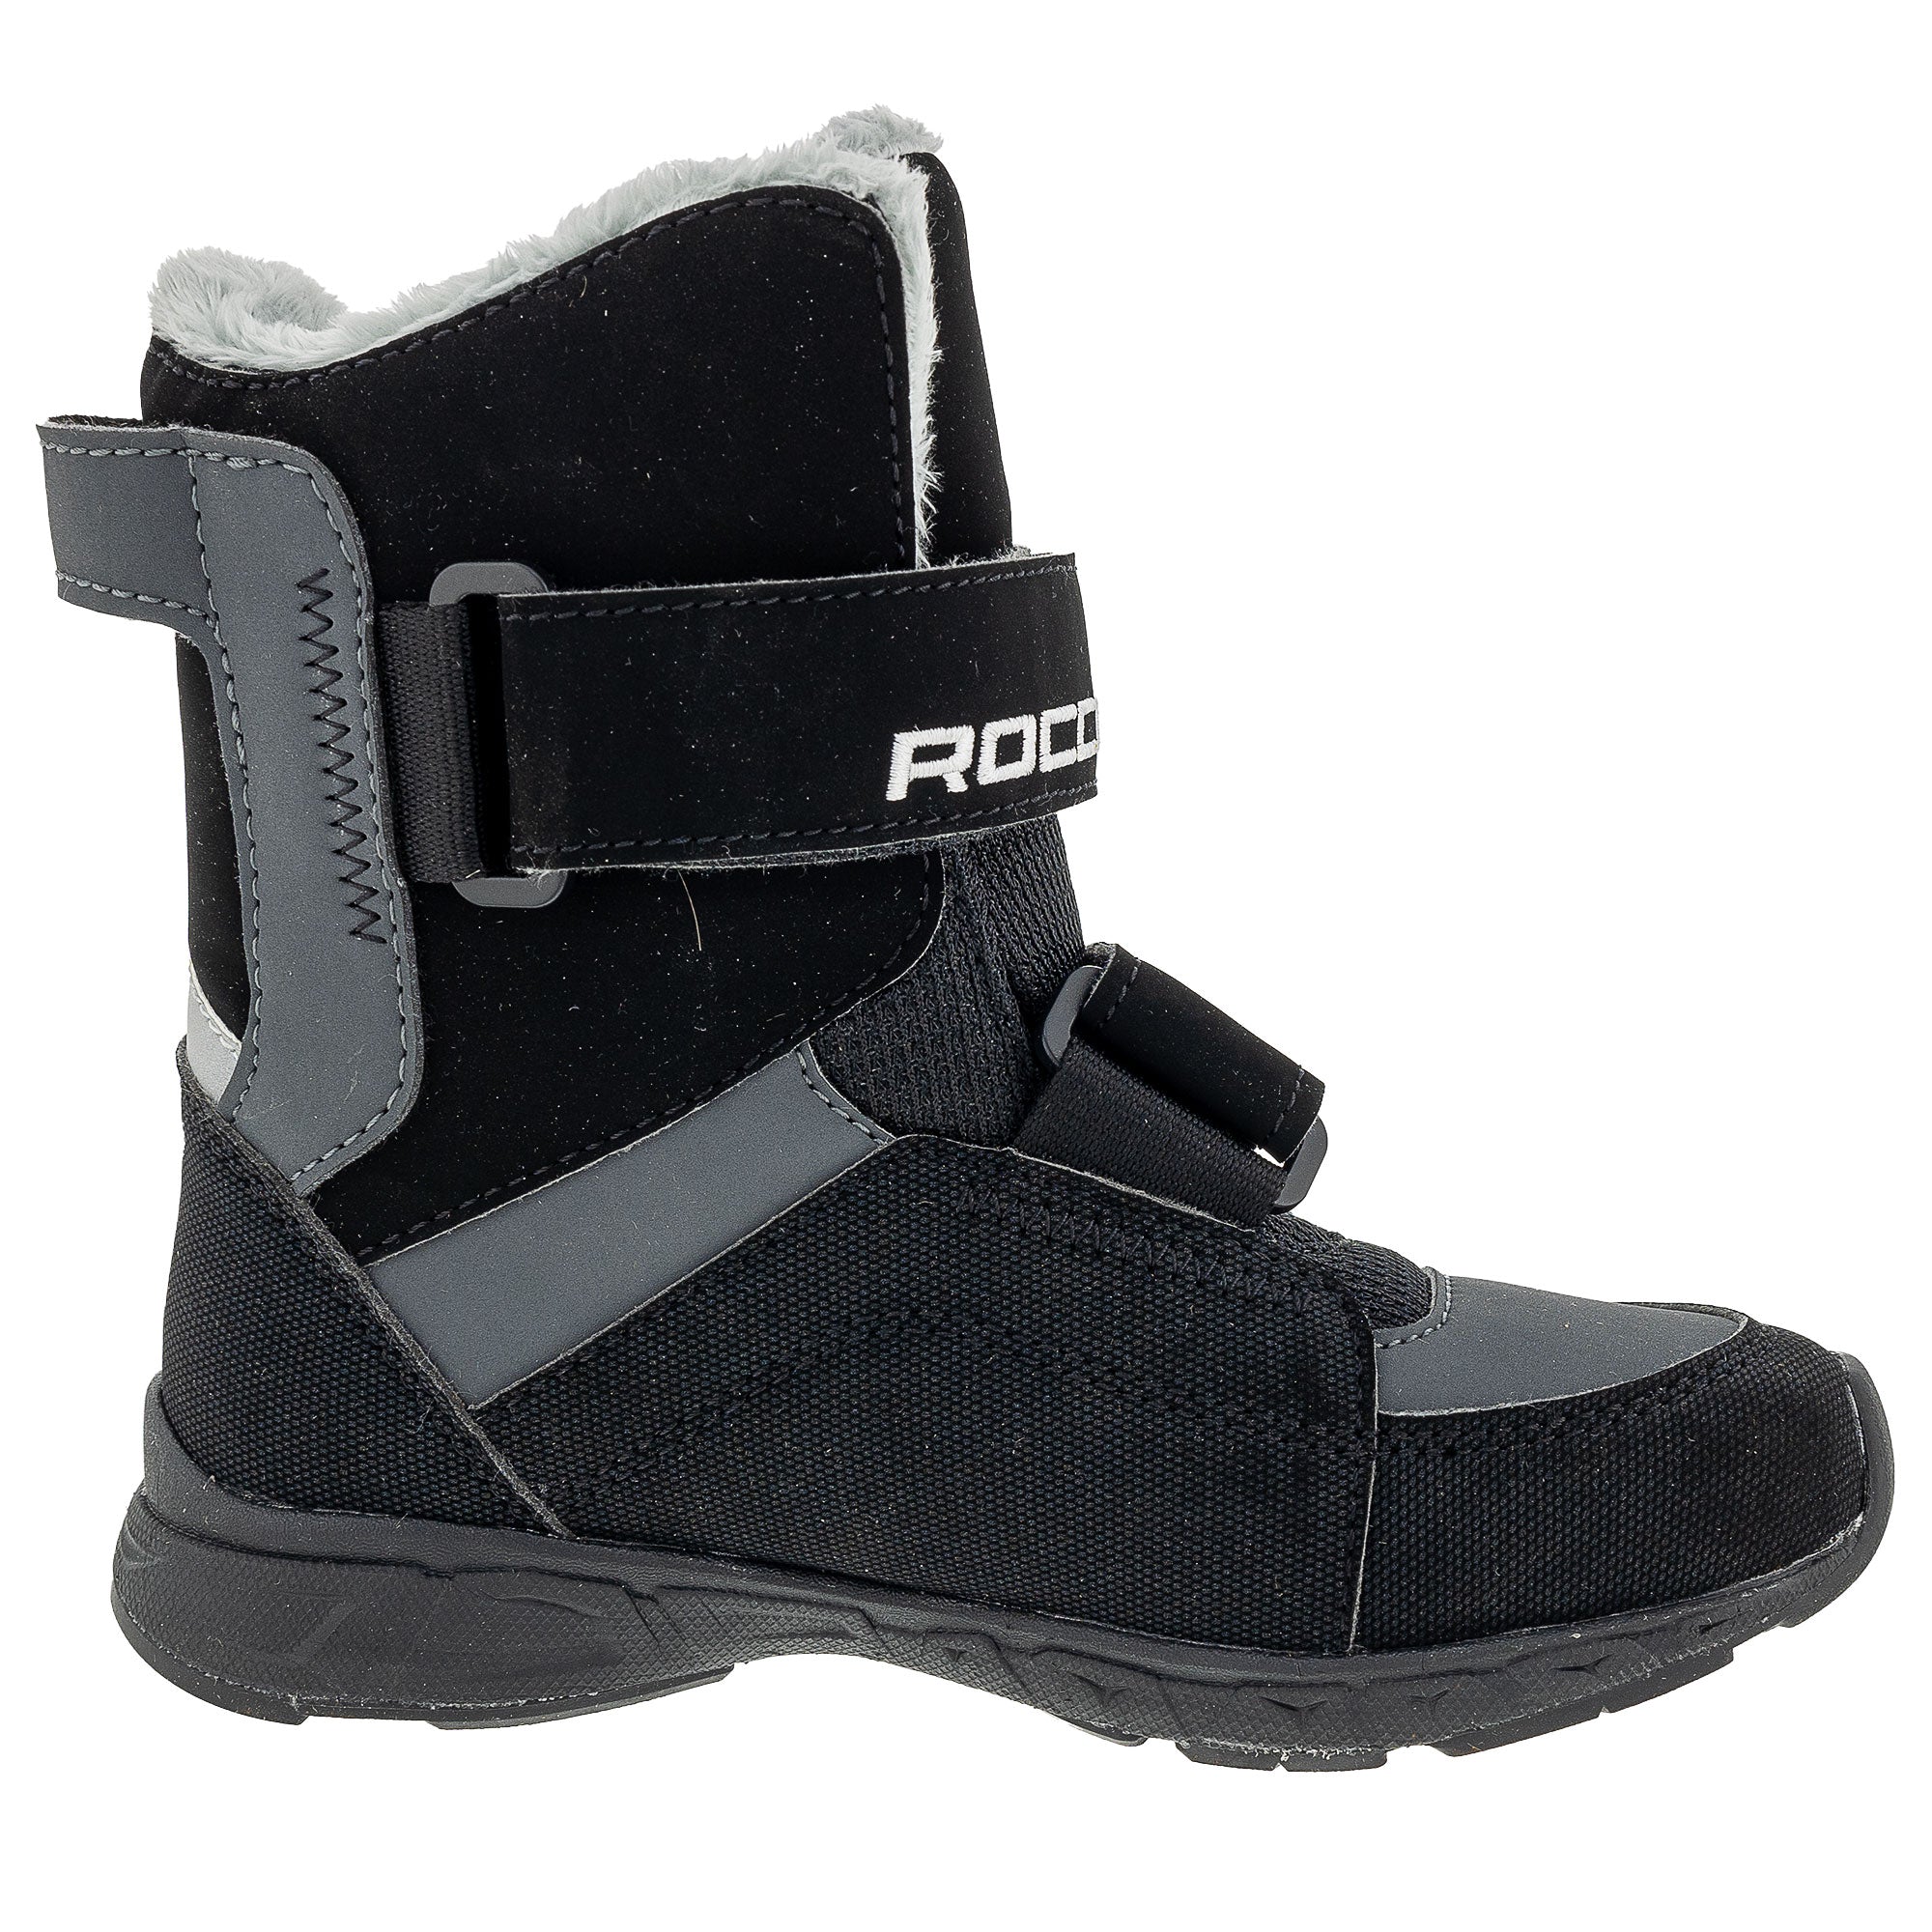 509 F06001000-100-001 Youth Rocco Snow Boot Insulated Waterproof Lining Nubuck Leather